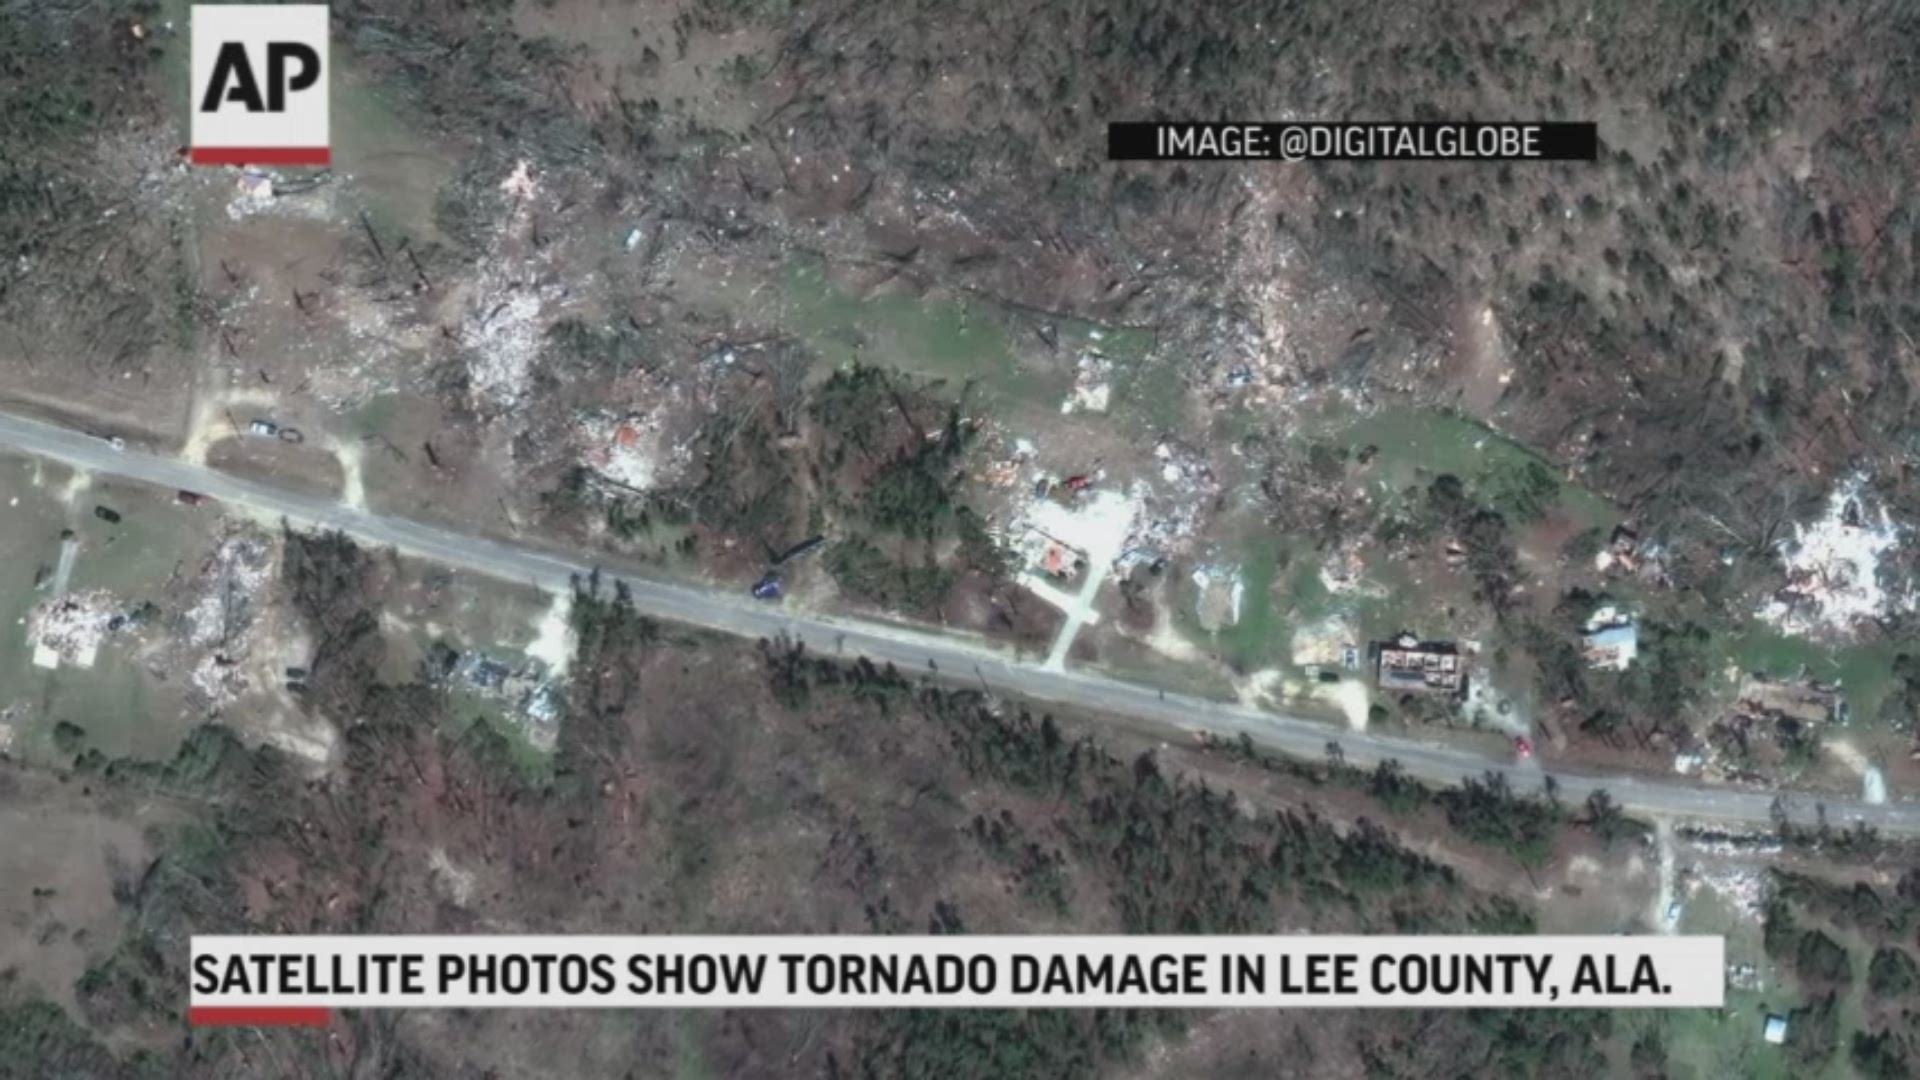 Satellite photos from DigitalGlobe show the destruction from the tornado that hit Lee County, Alabama on Sunday. (AP)